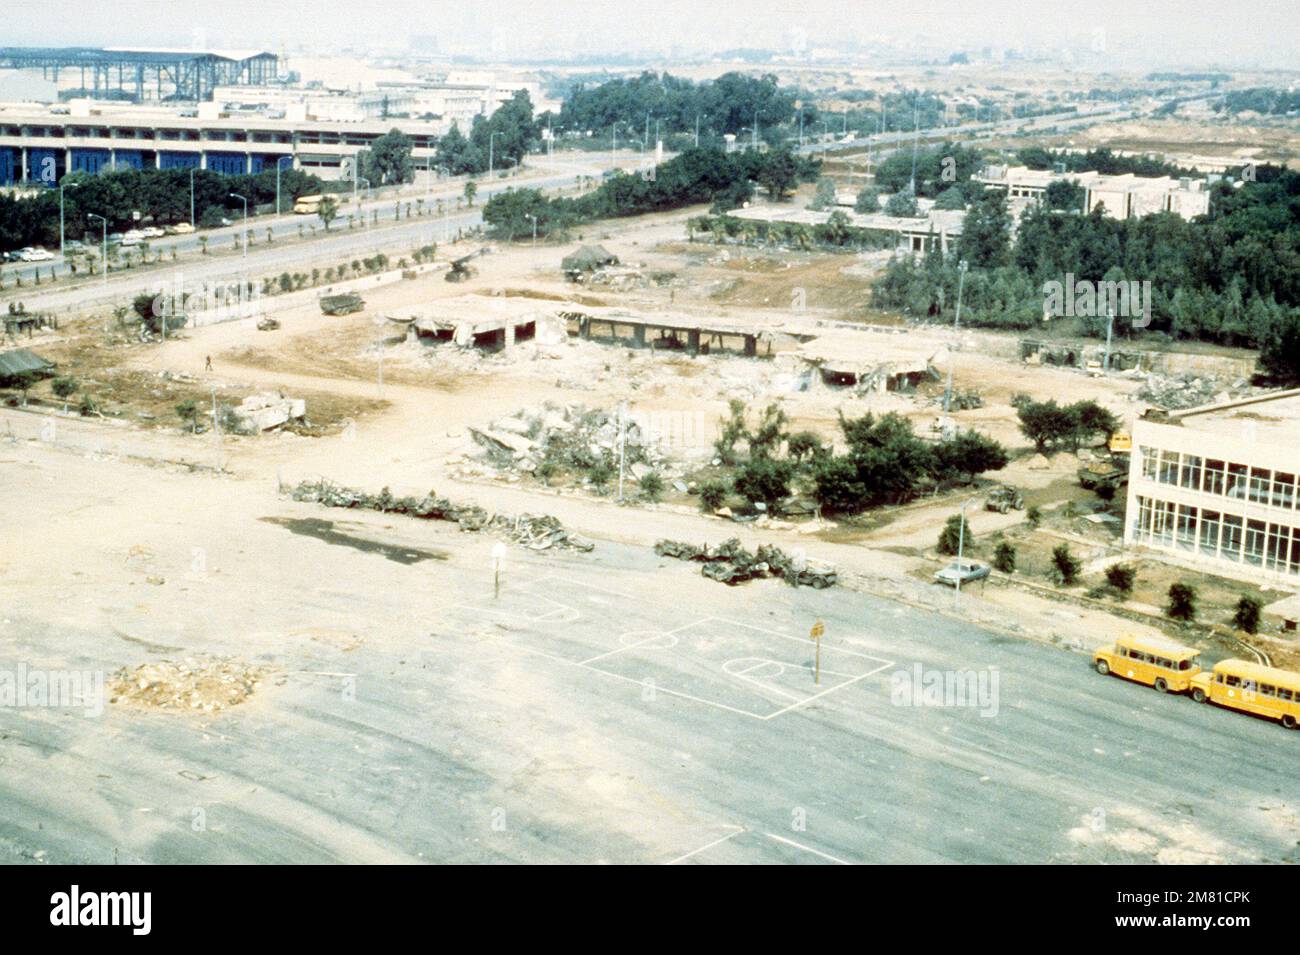 An aerial view of the remains of the Marine battalion Landing Team headquarters and barracks at Beirut International Airport. The building was destroyed by a terrorist bomb attack. Base: Beirut Country: Lebanon (LBN) Stock Photo